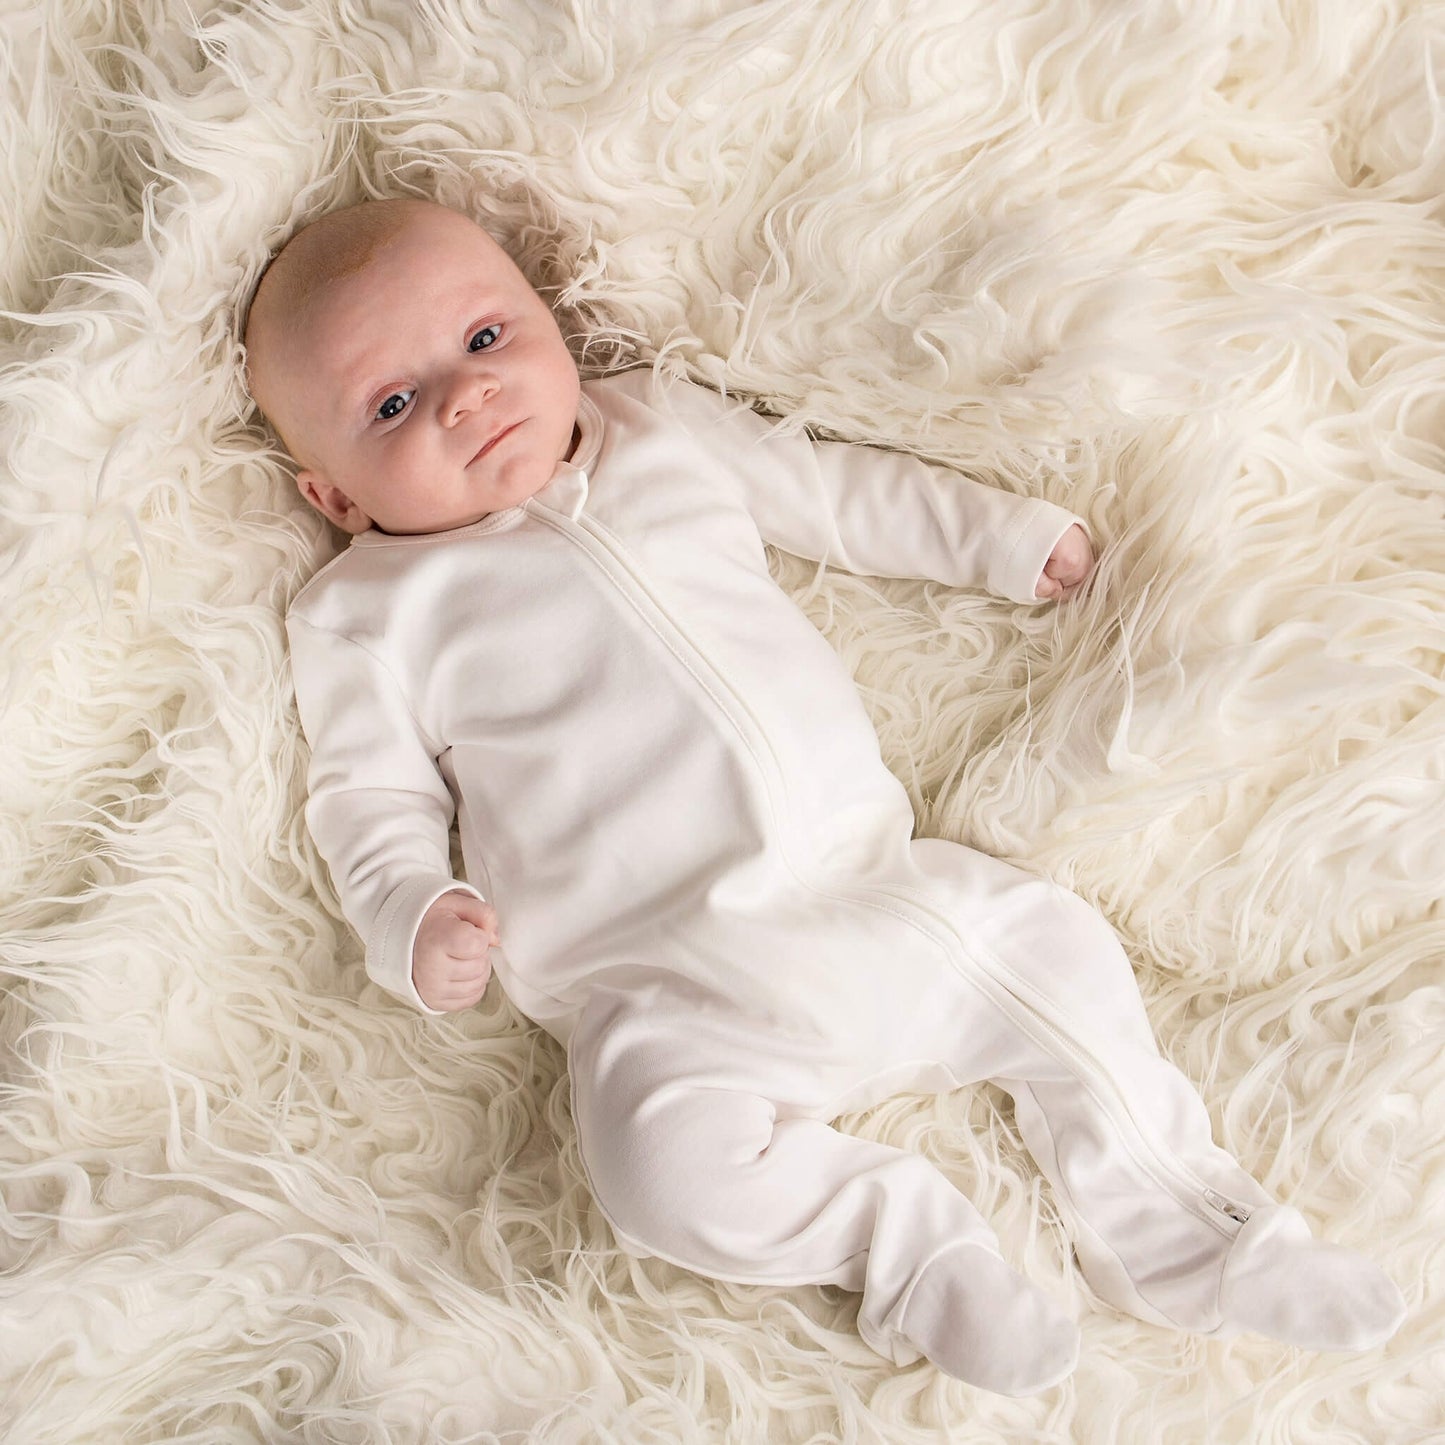 Baby less than 12 months old, laying down wearing a nueborn white double zip sleepsuit